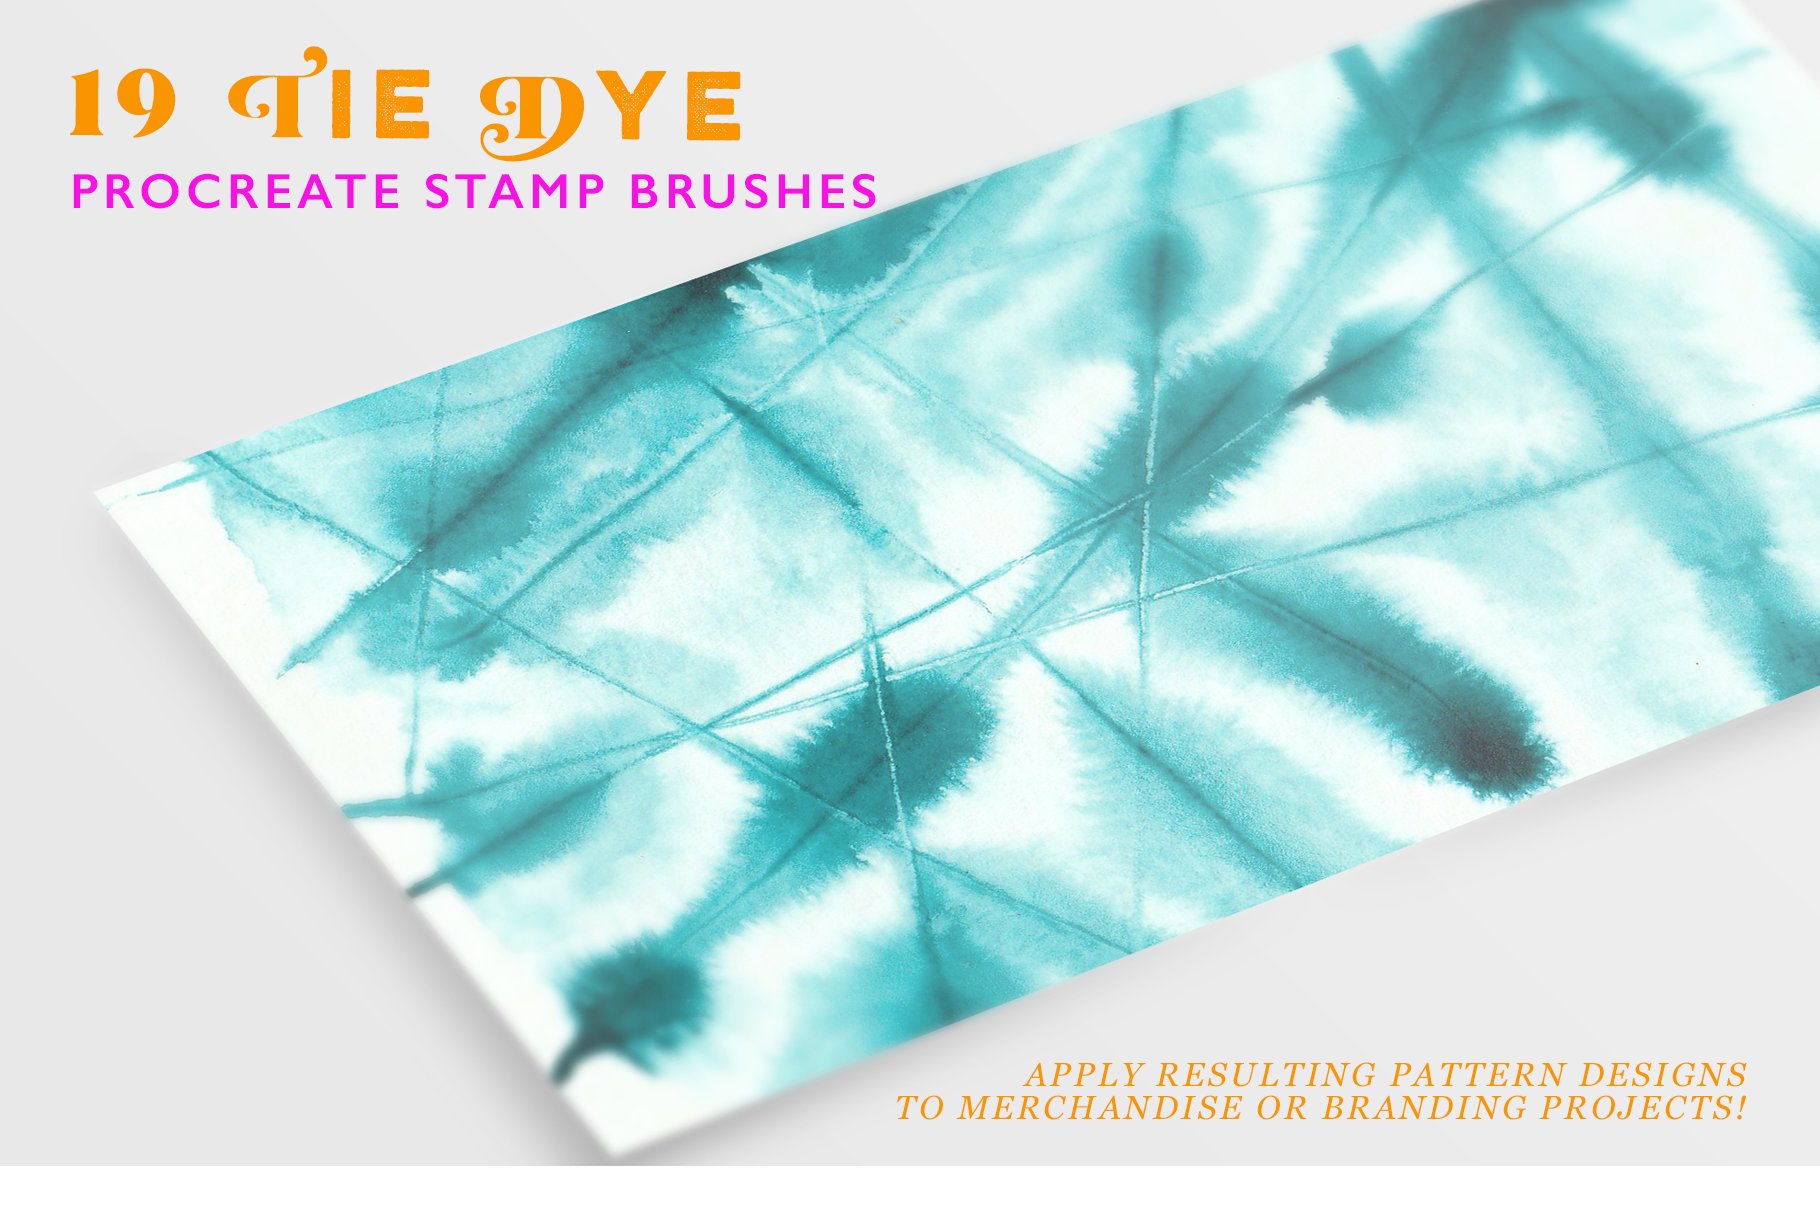 Procreate Tie Dye Stamp Brushes preview image.